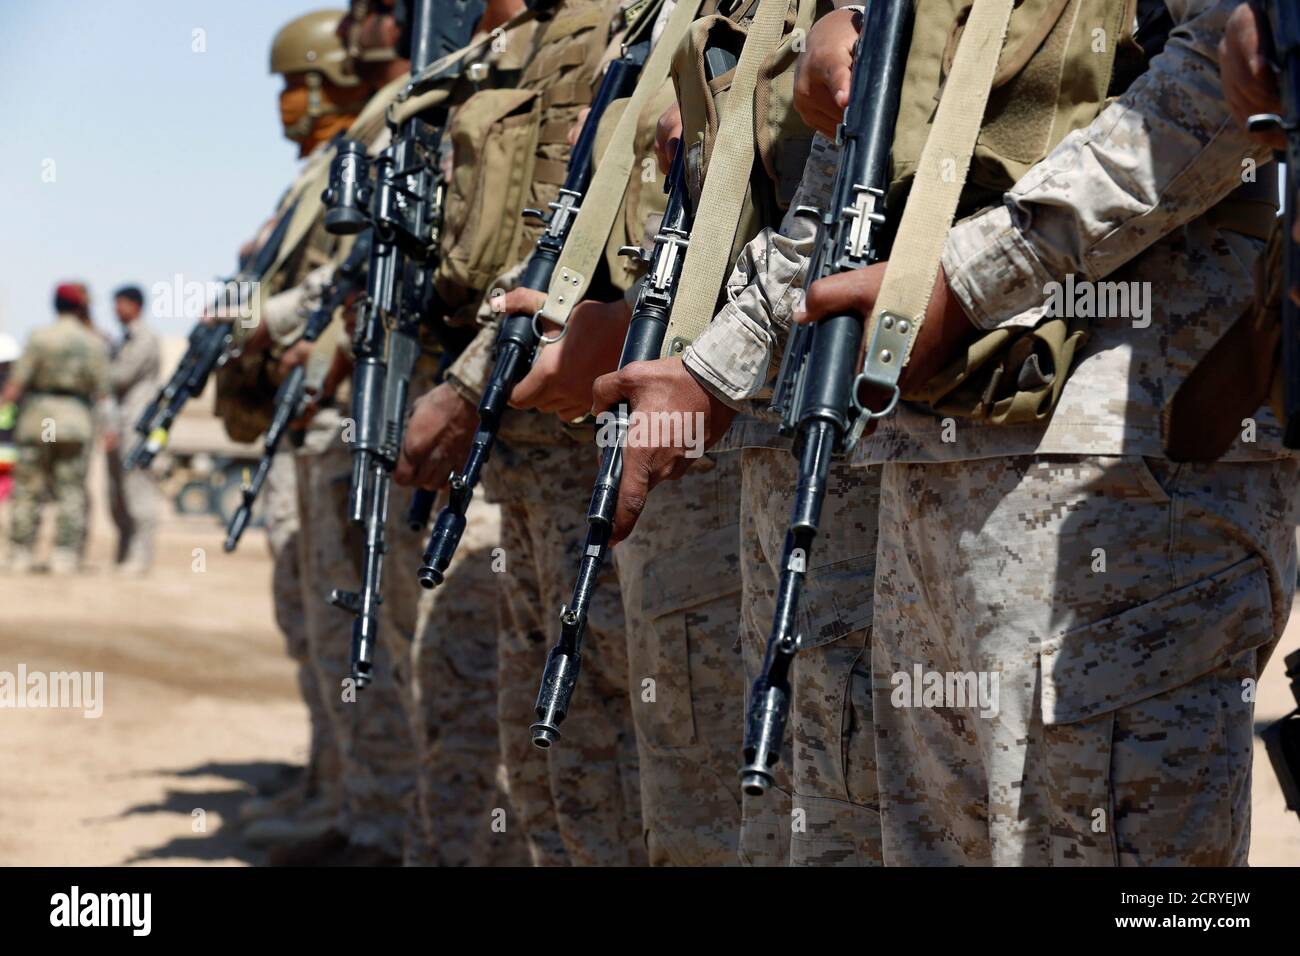 Saudi soldiers stand in line at an airfield where Saudi military cargo planes land to deliver aid in Marib, Yemen January 26, 2018. Picture taken January 26, 2018. REUTERS/Faisal Al Nasser Stock Photo